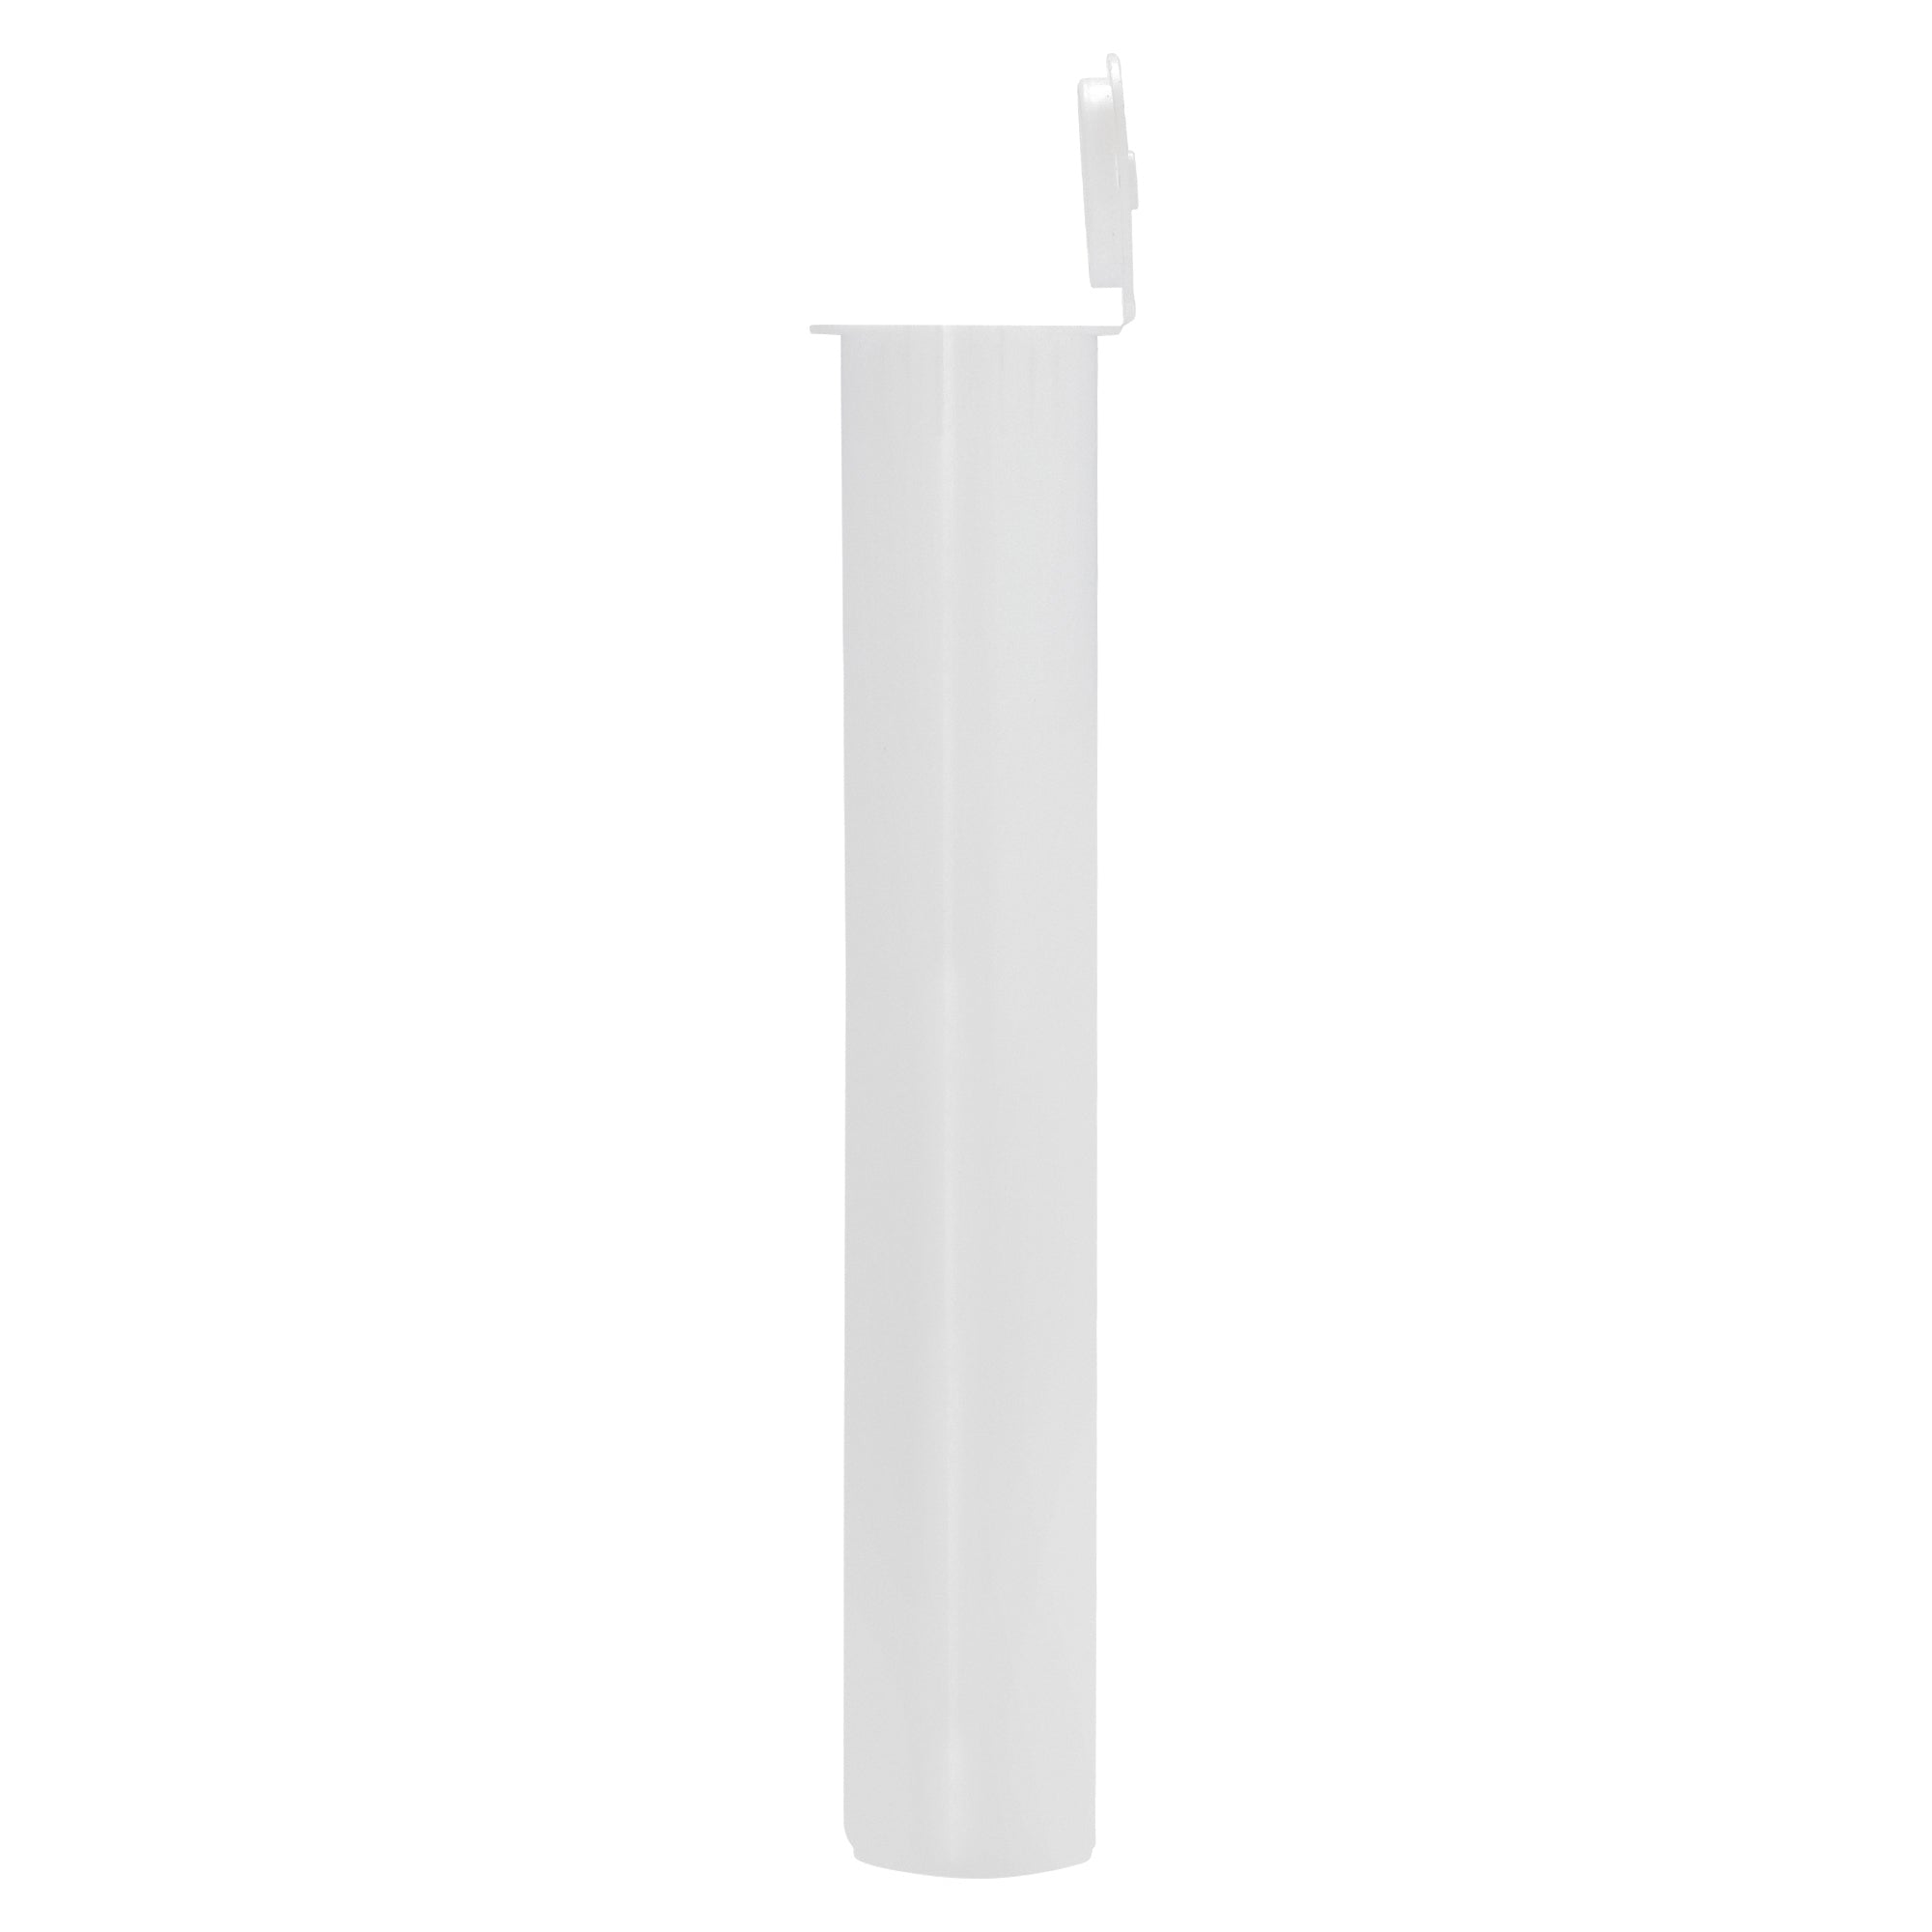 Clear Plastic Joint Tubes Shipped Nationwide